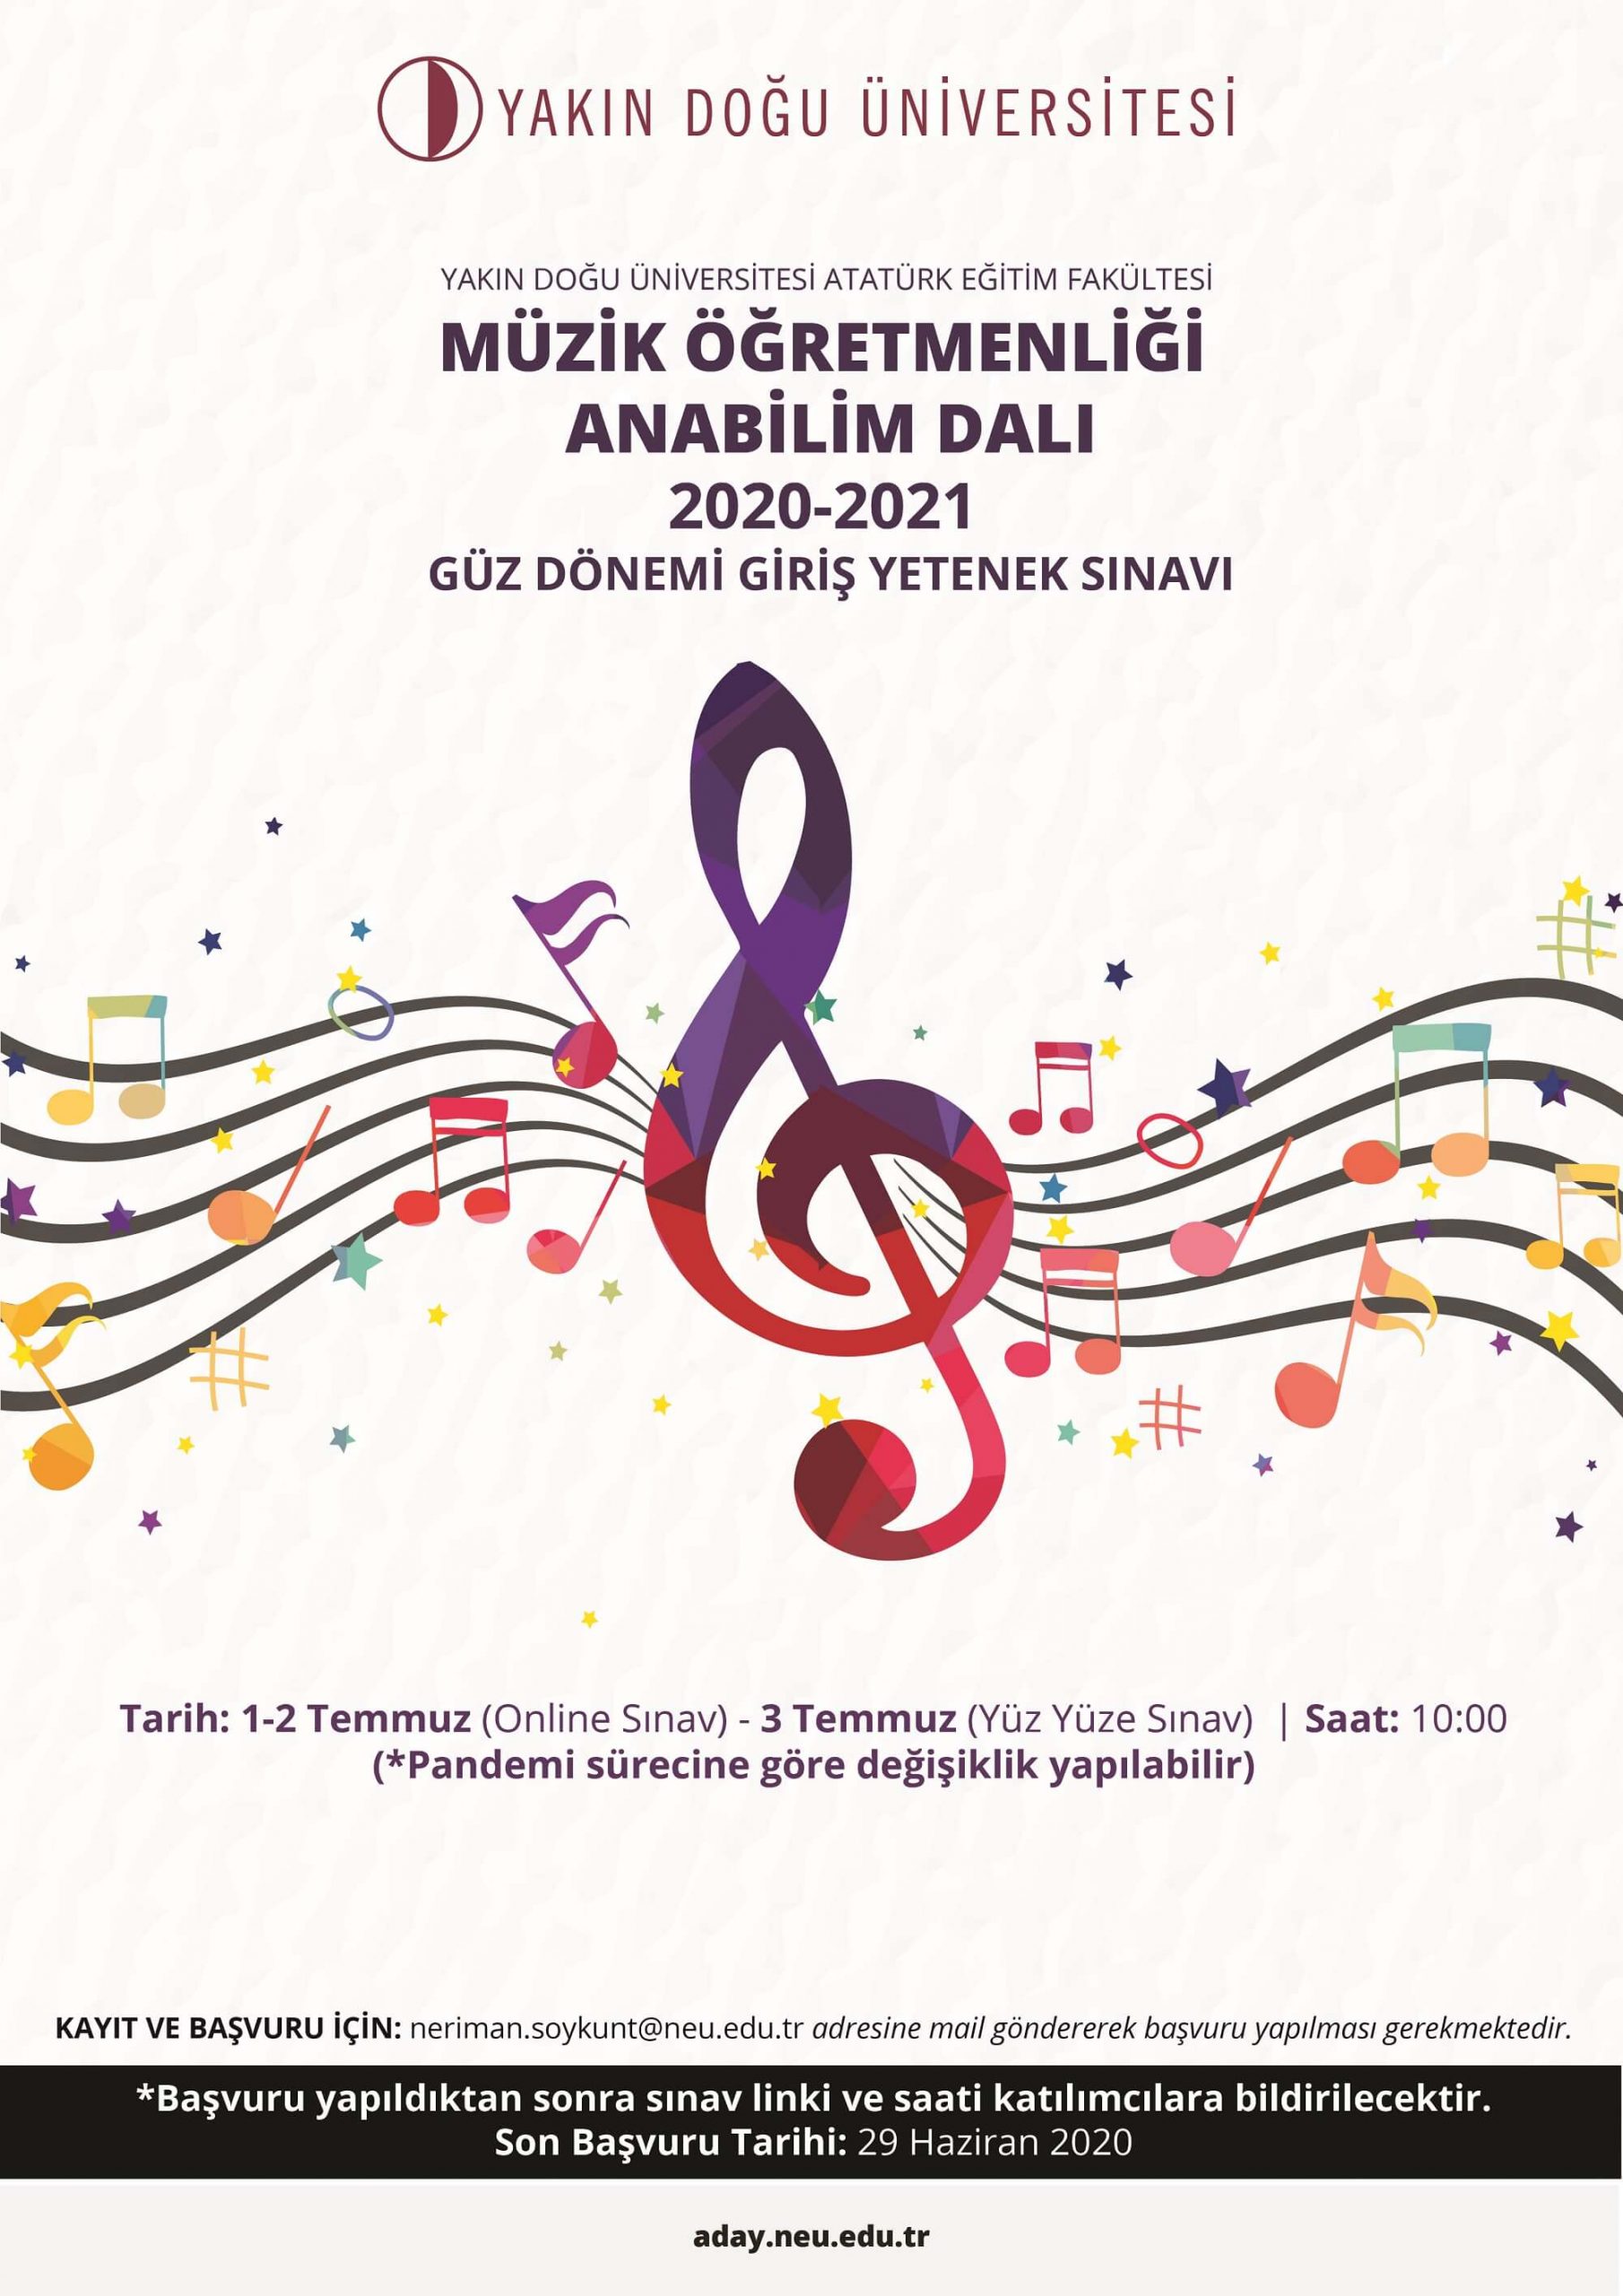 Application process for the undergraduate, master’s degree and PhD programs offered by the Department of Music Teaching of the Fine Arts Section of Atatürk Faculty of Education of Near East University is ongoing